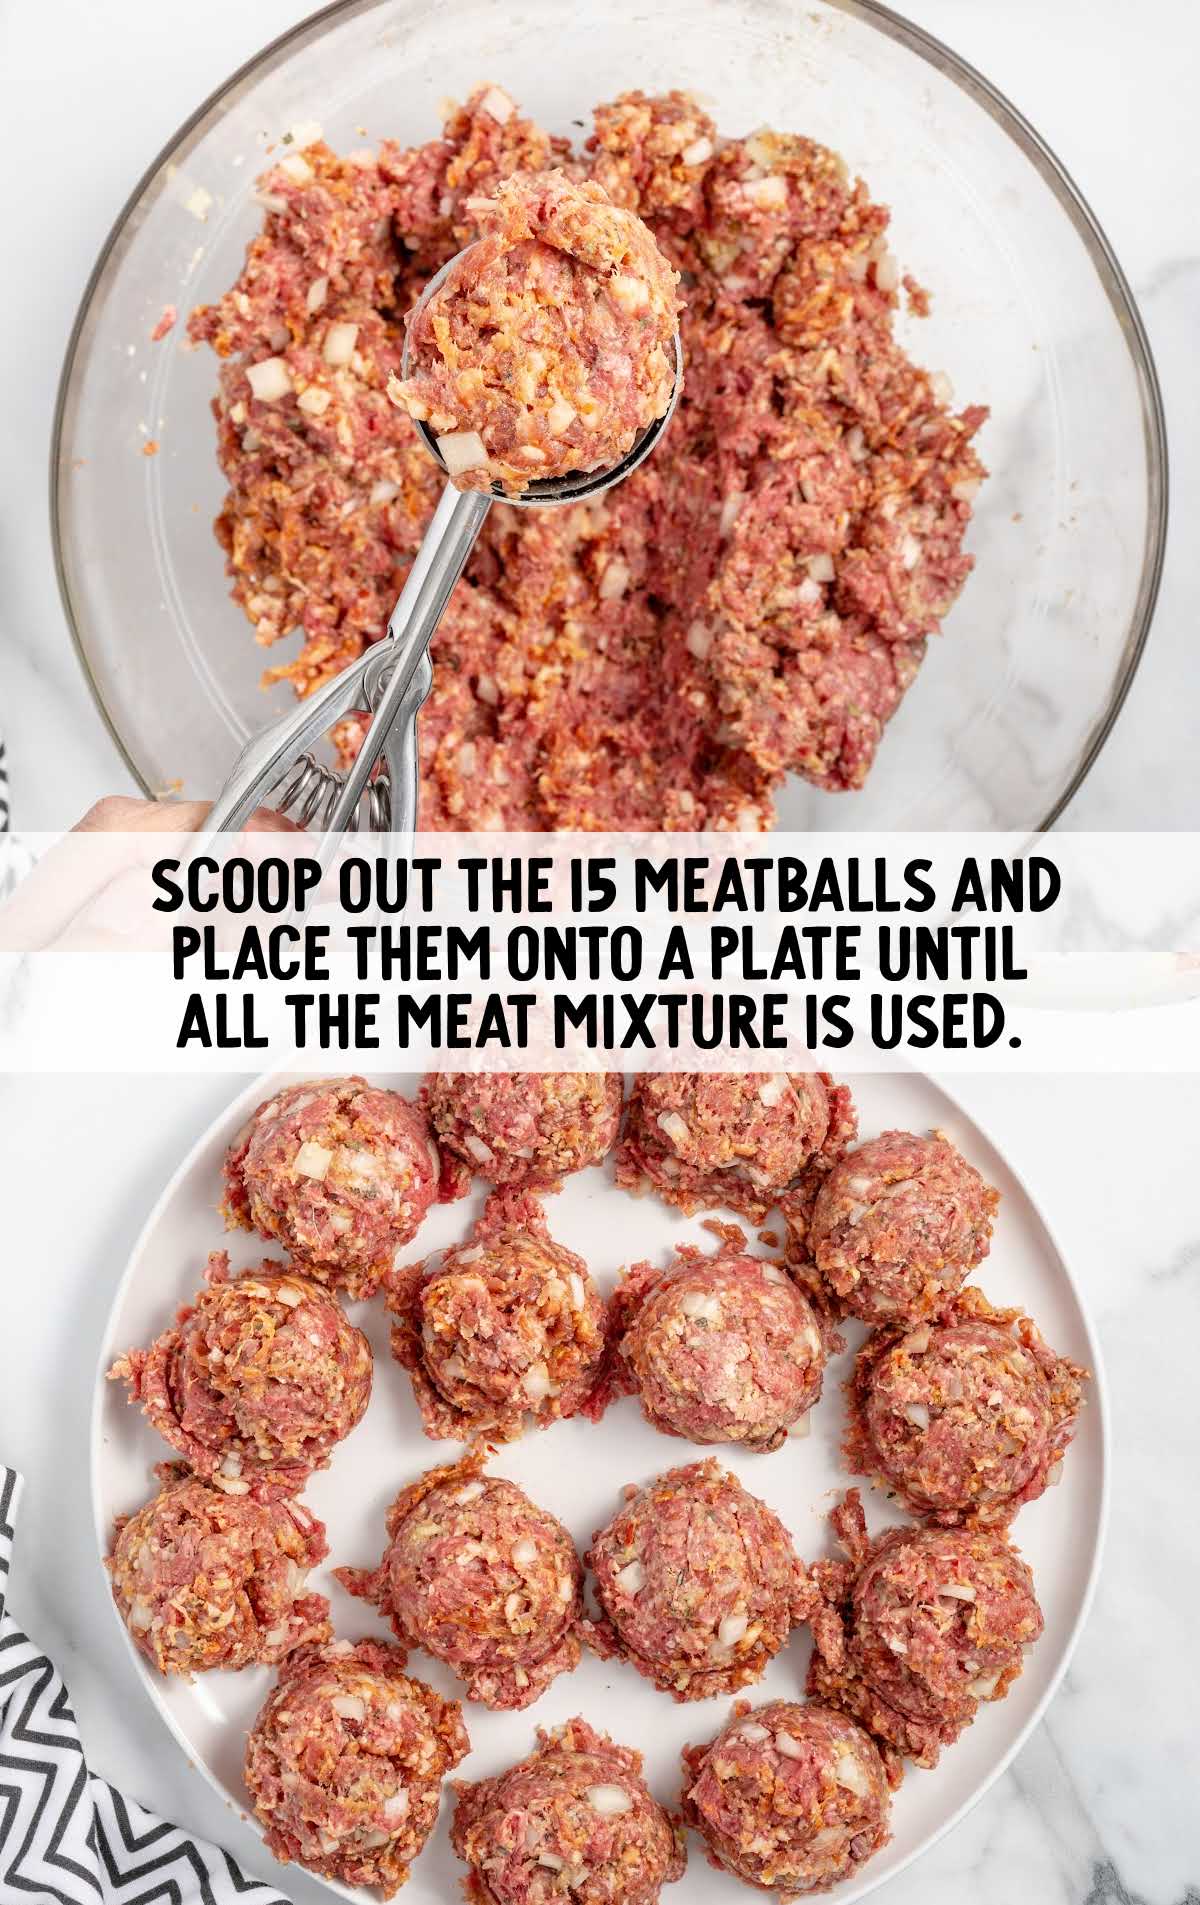 meatball mixture scooped out to form 15 meatballs